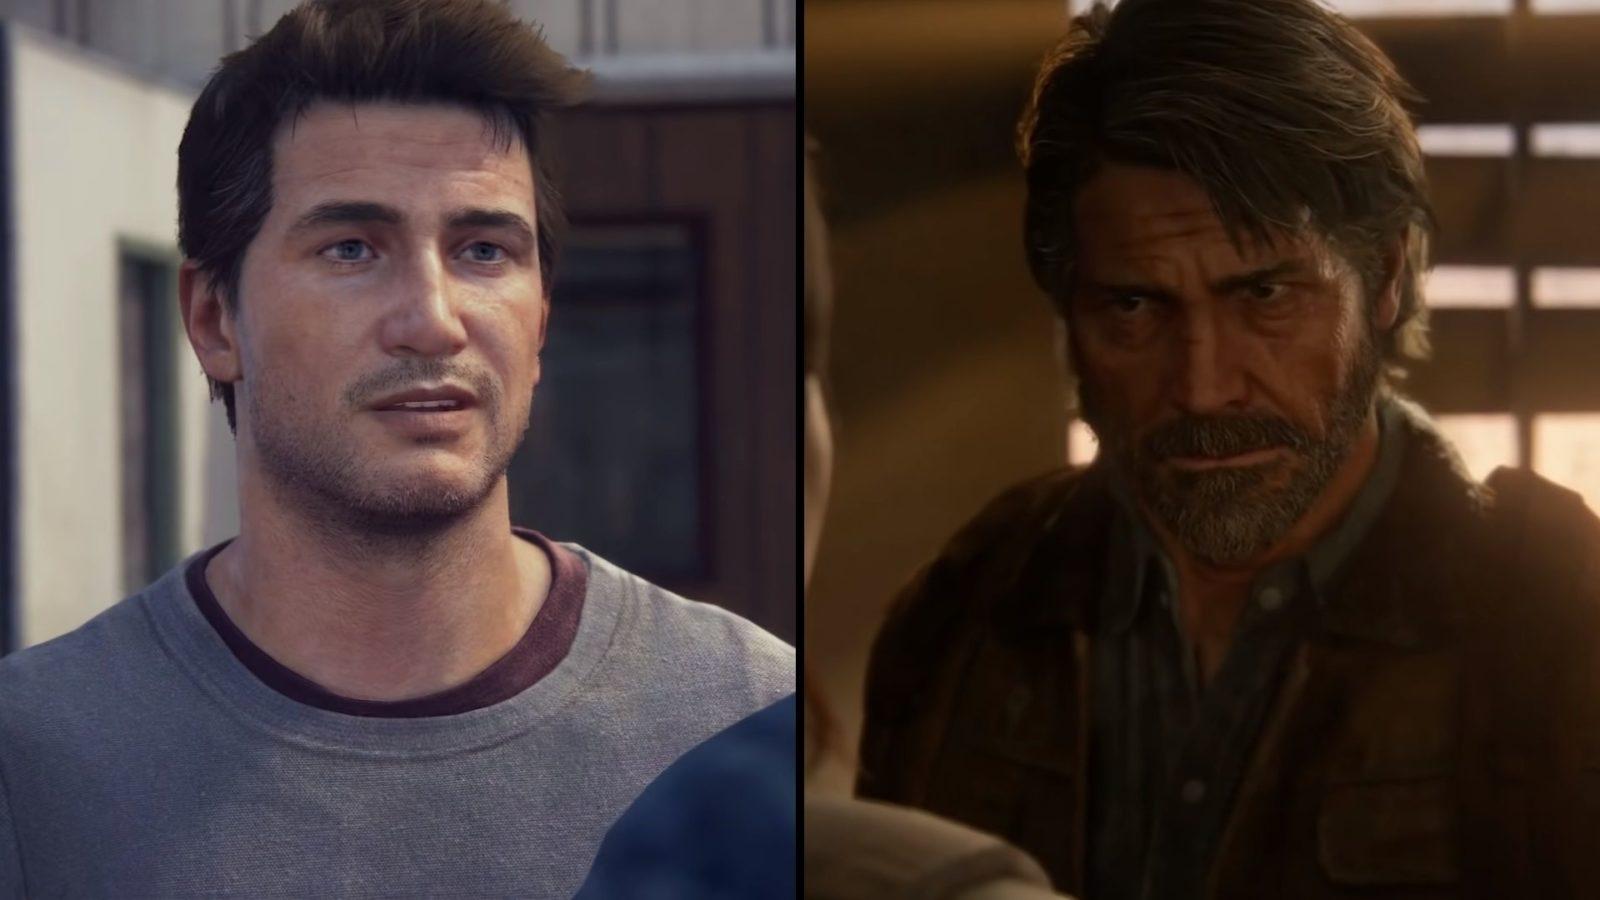 Fan Fuses The Last of Us' Joel with Uncharted's Nathan Drake